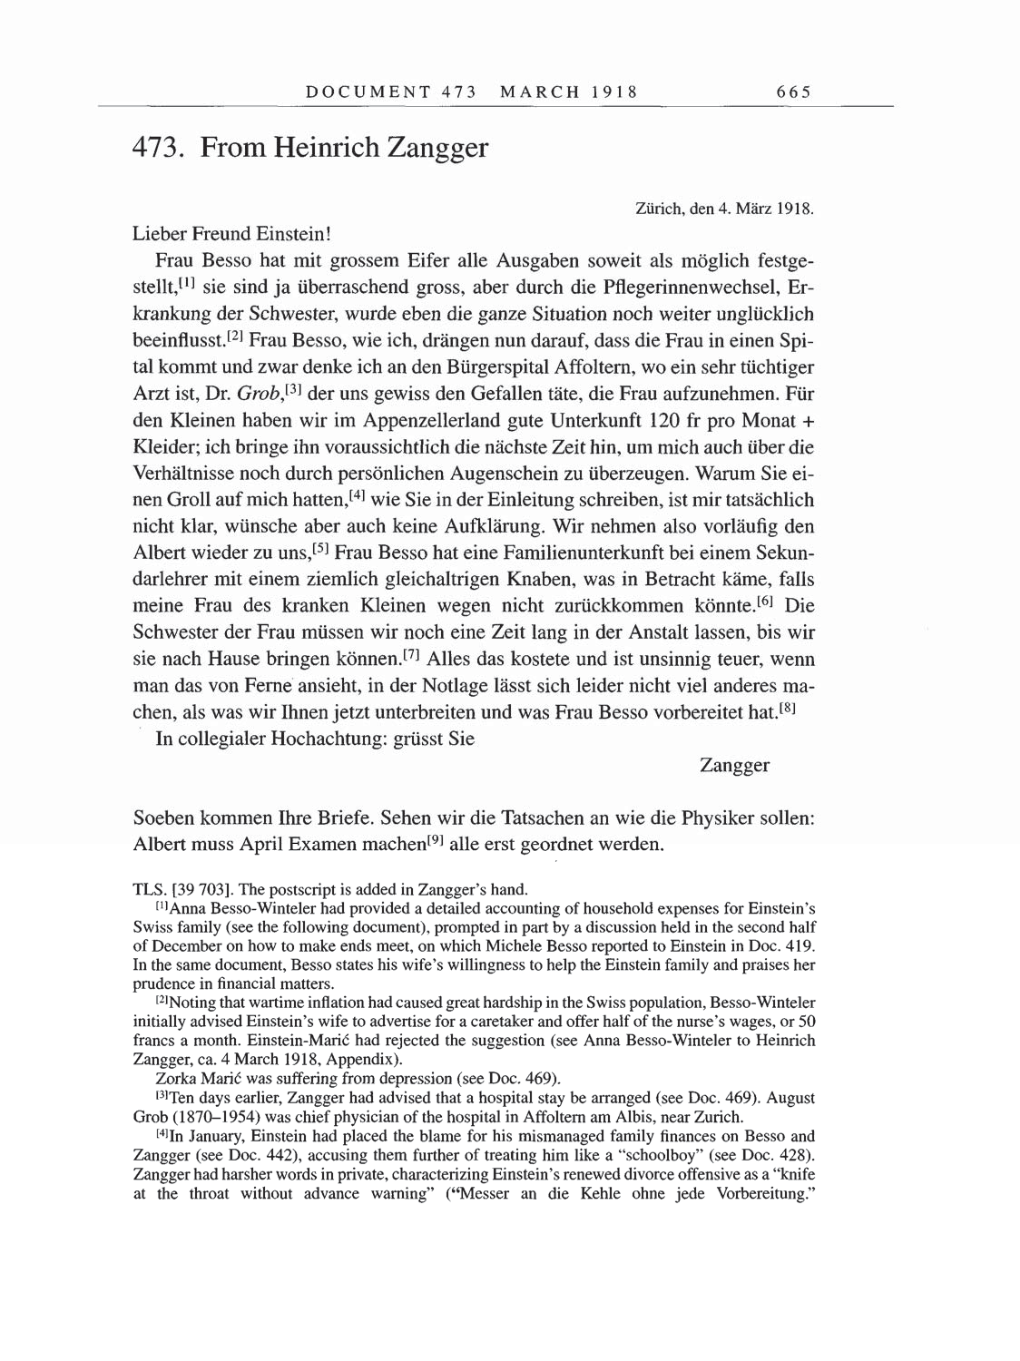 Volume 8, Part B: The Berlin Years: Correspondence 1918 page 665